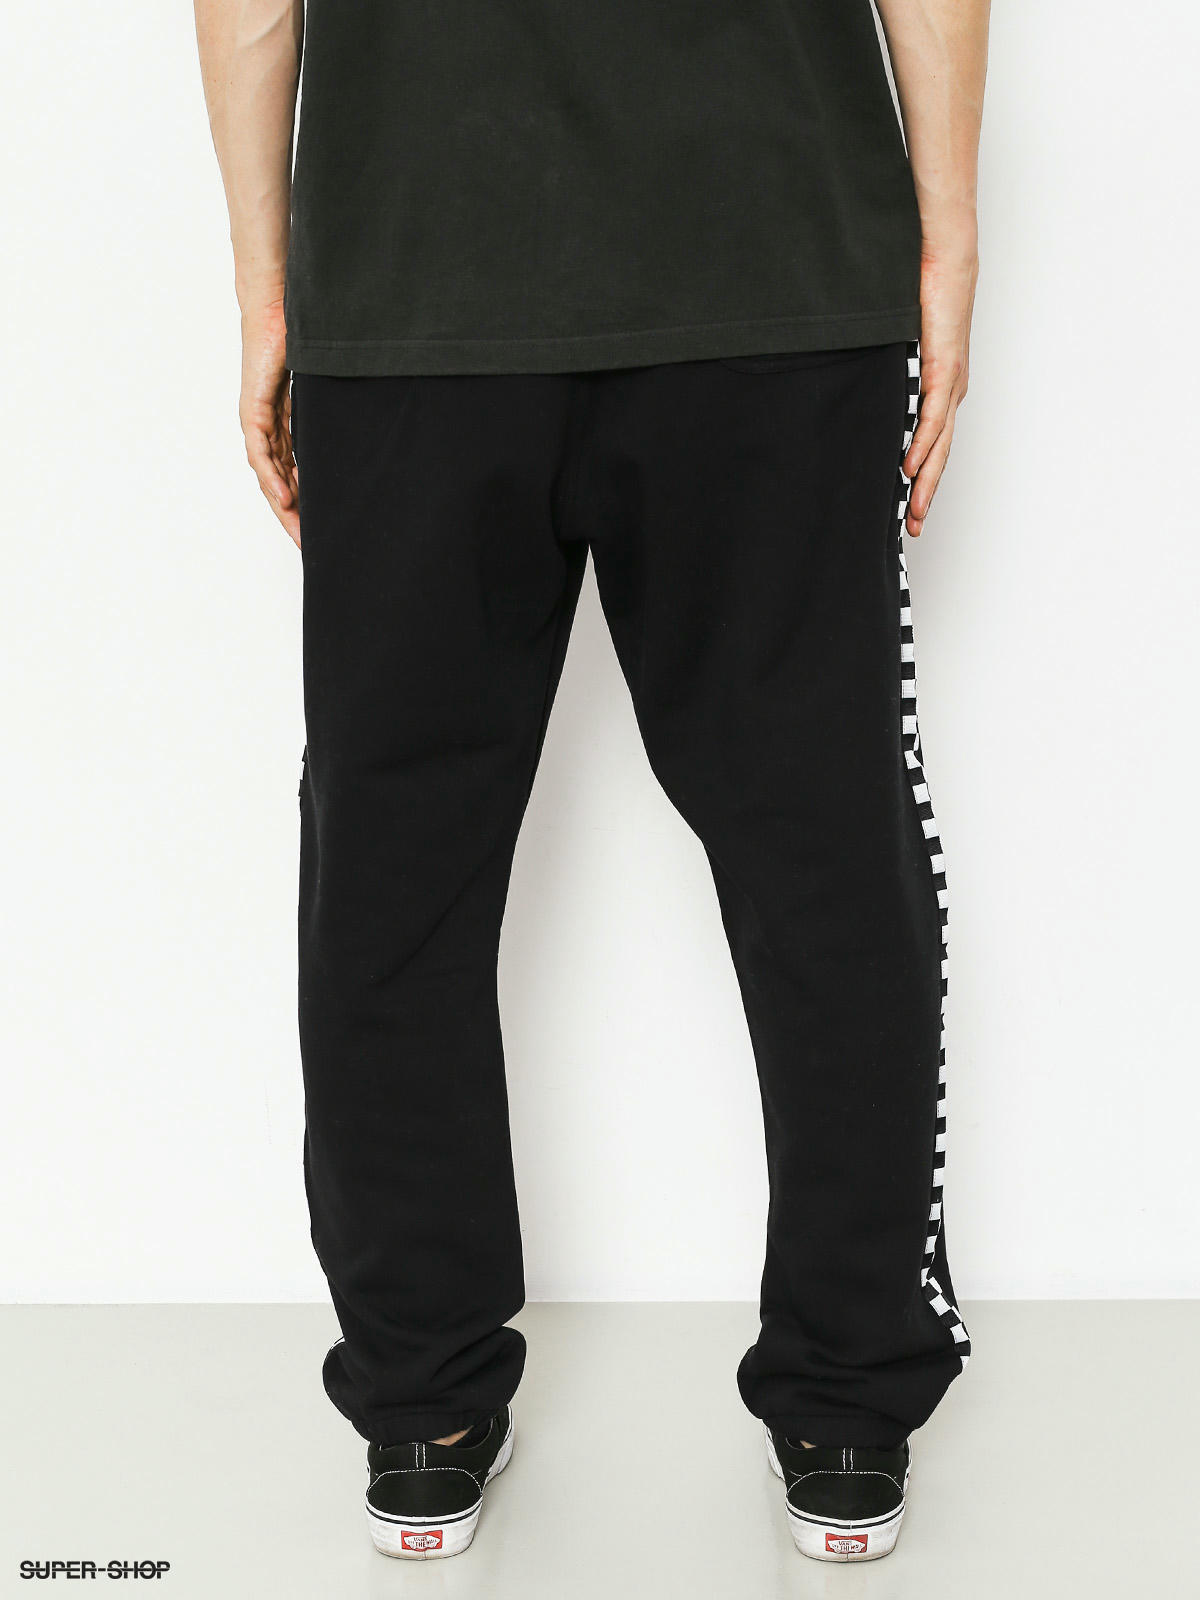 Dorotea star collection jogging trousers by Golden Goose | Tessabit